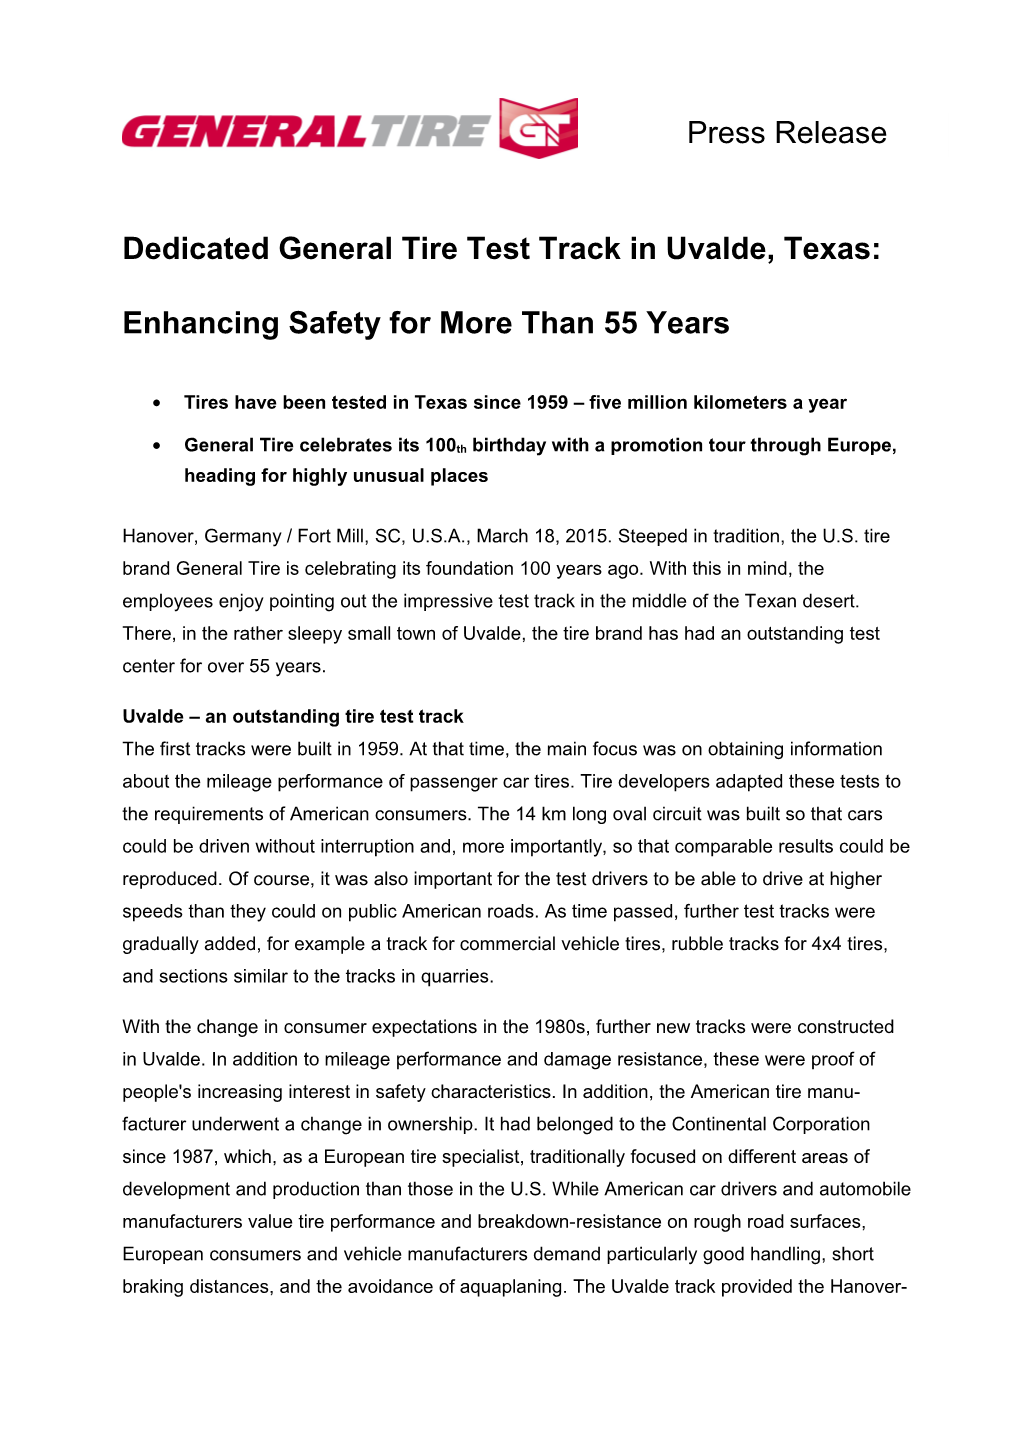 Tires Have Been Tested in Texas Since 1959 Five Million Kilometers a Year